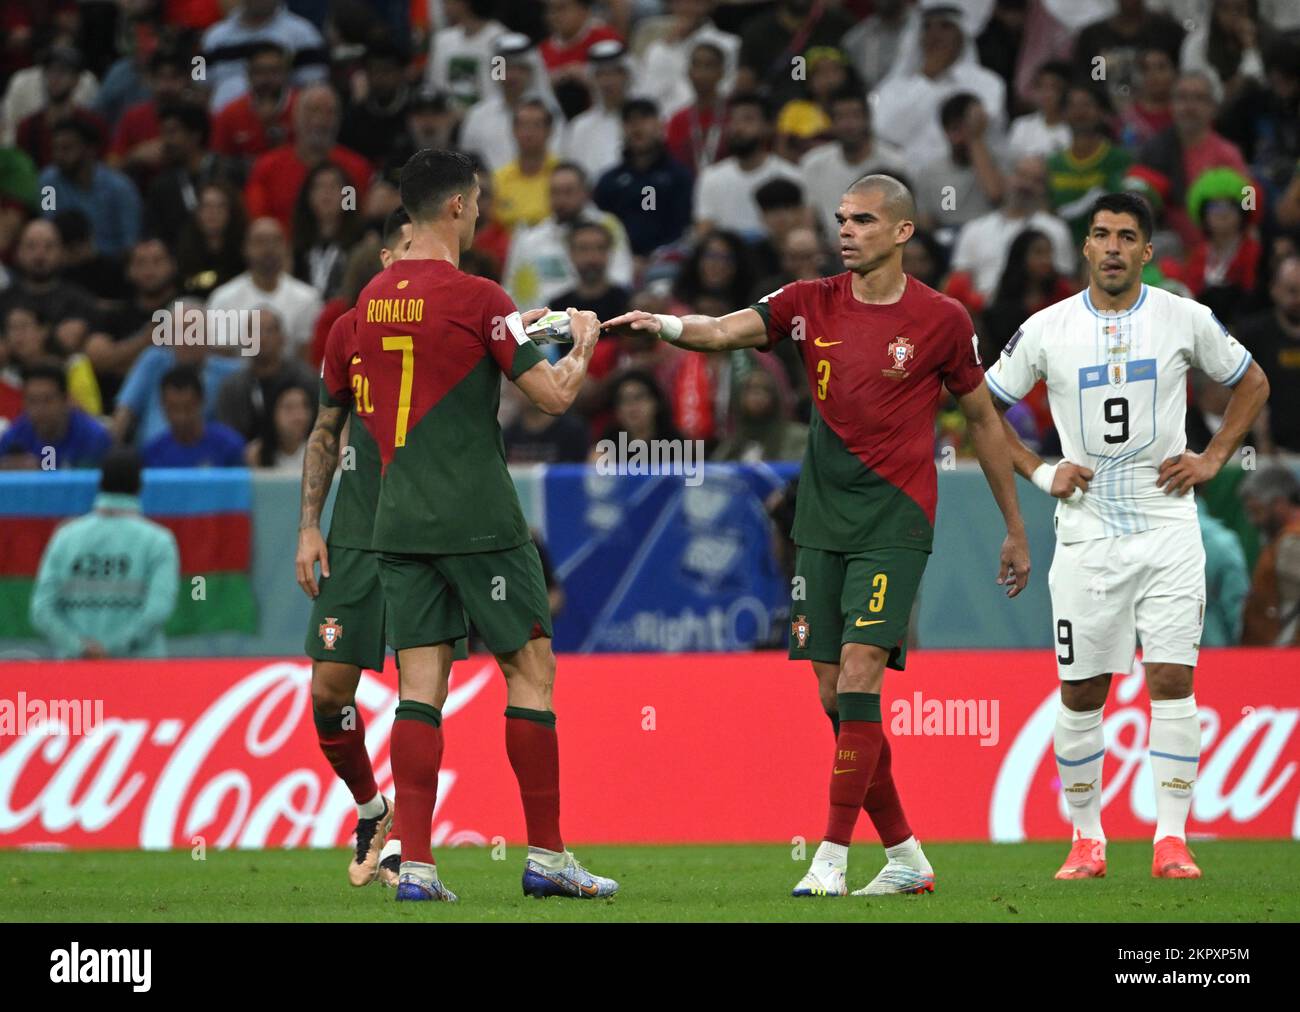 Lusail, Qatar. 28th Nov, 2022. Portugal's Cristiano Ronaldo (L, front) gives the captain armband to Portugal's Pepe (C) during the Group H match between Portugal and Uruguay at the 2022 FIFA World Cup at Lusail Stadium in Lusail, Qatar, Nov. 28, 2022. Credit: Li Ga/Xinhua/Alamy Live News Stock Photo